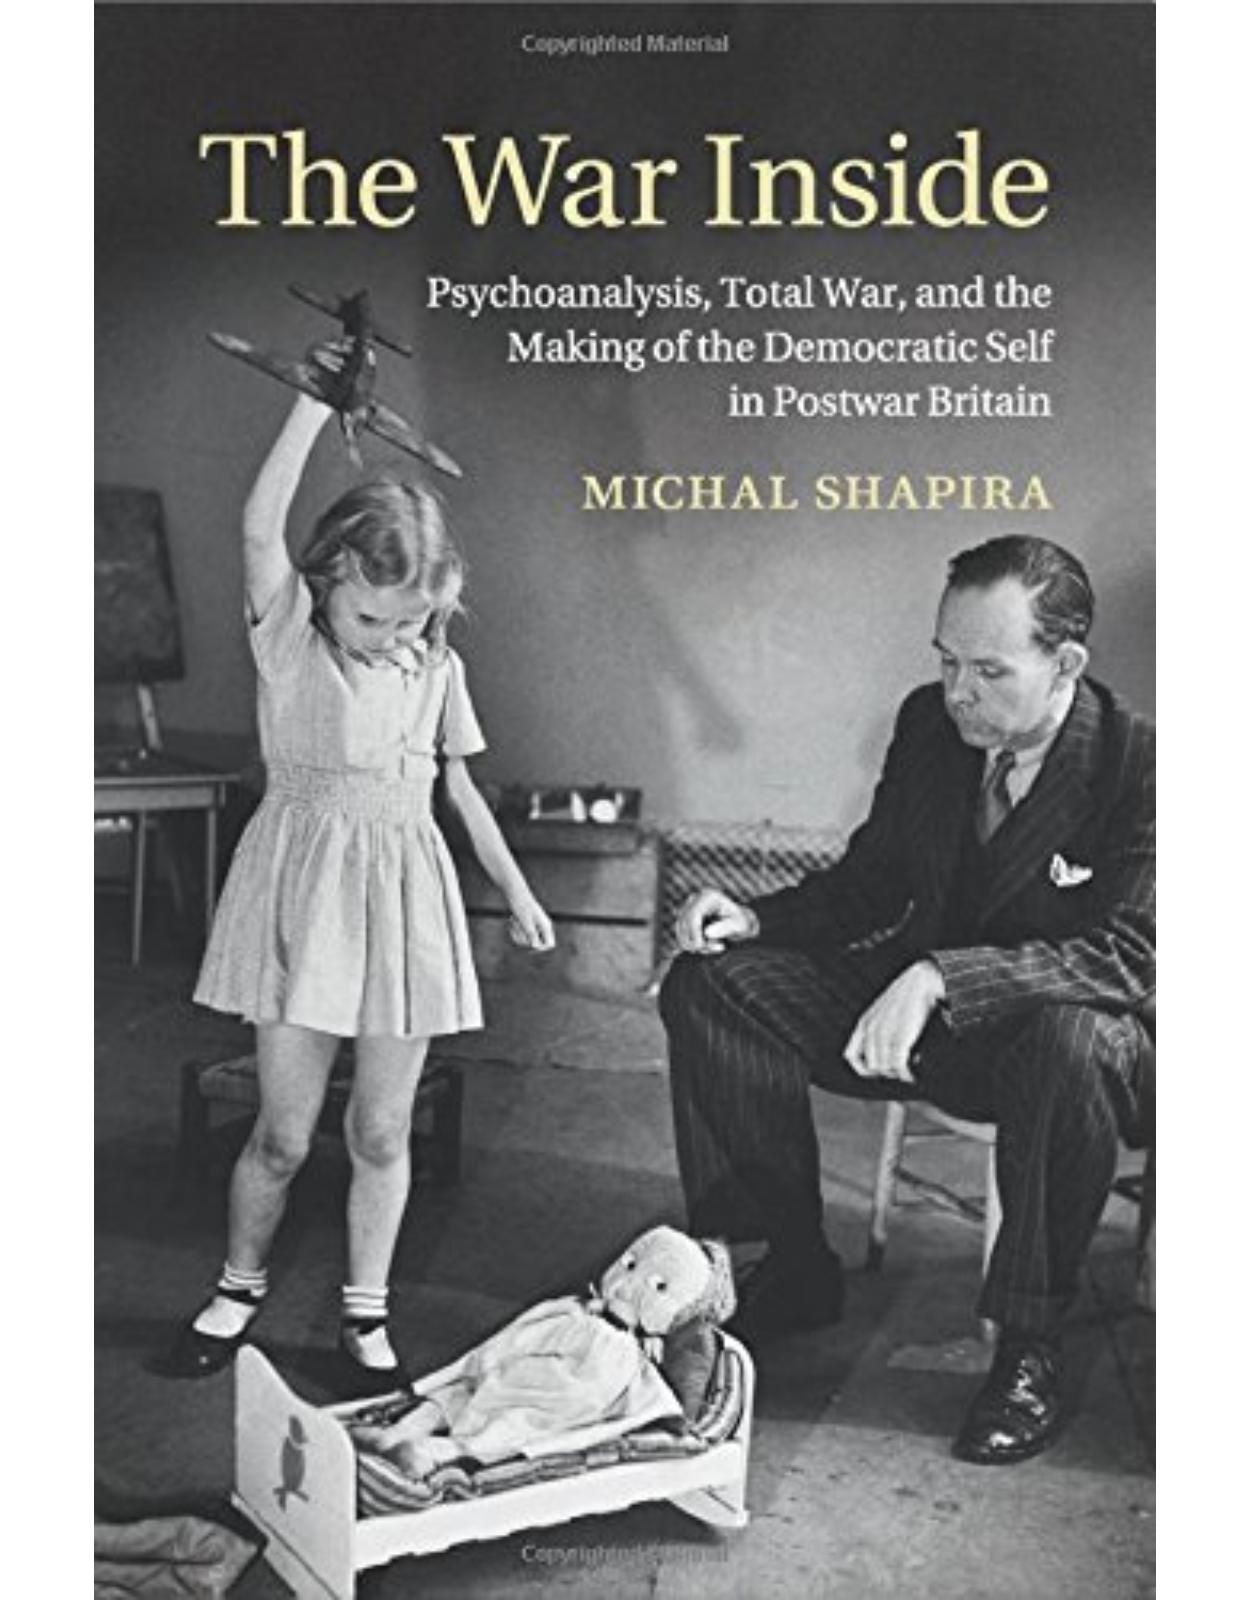 The War Inside: Psychoanalysis, Total War, and the Making of the Democratic Self in Postwar Britain (Studies in the Social and Cultural History of Modern Warfare)